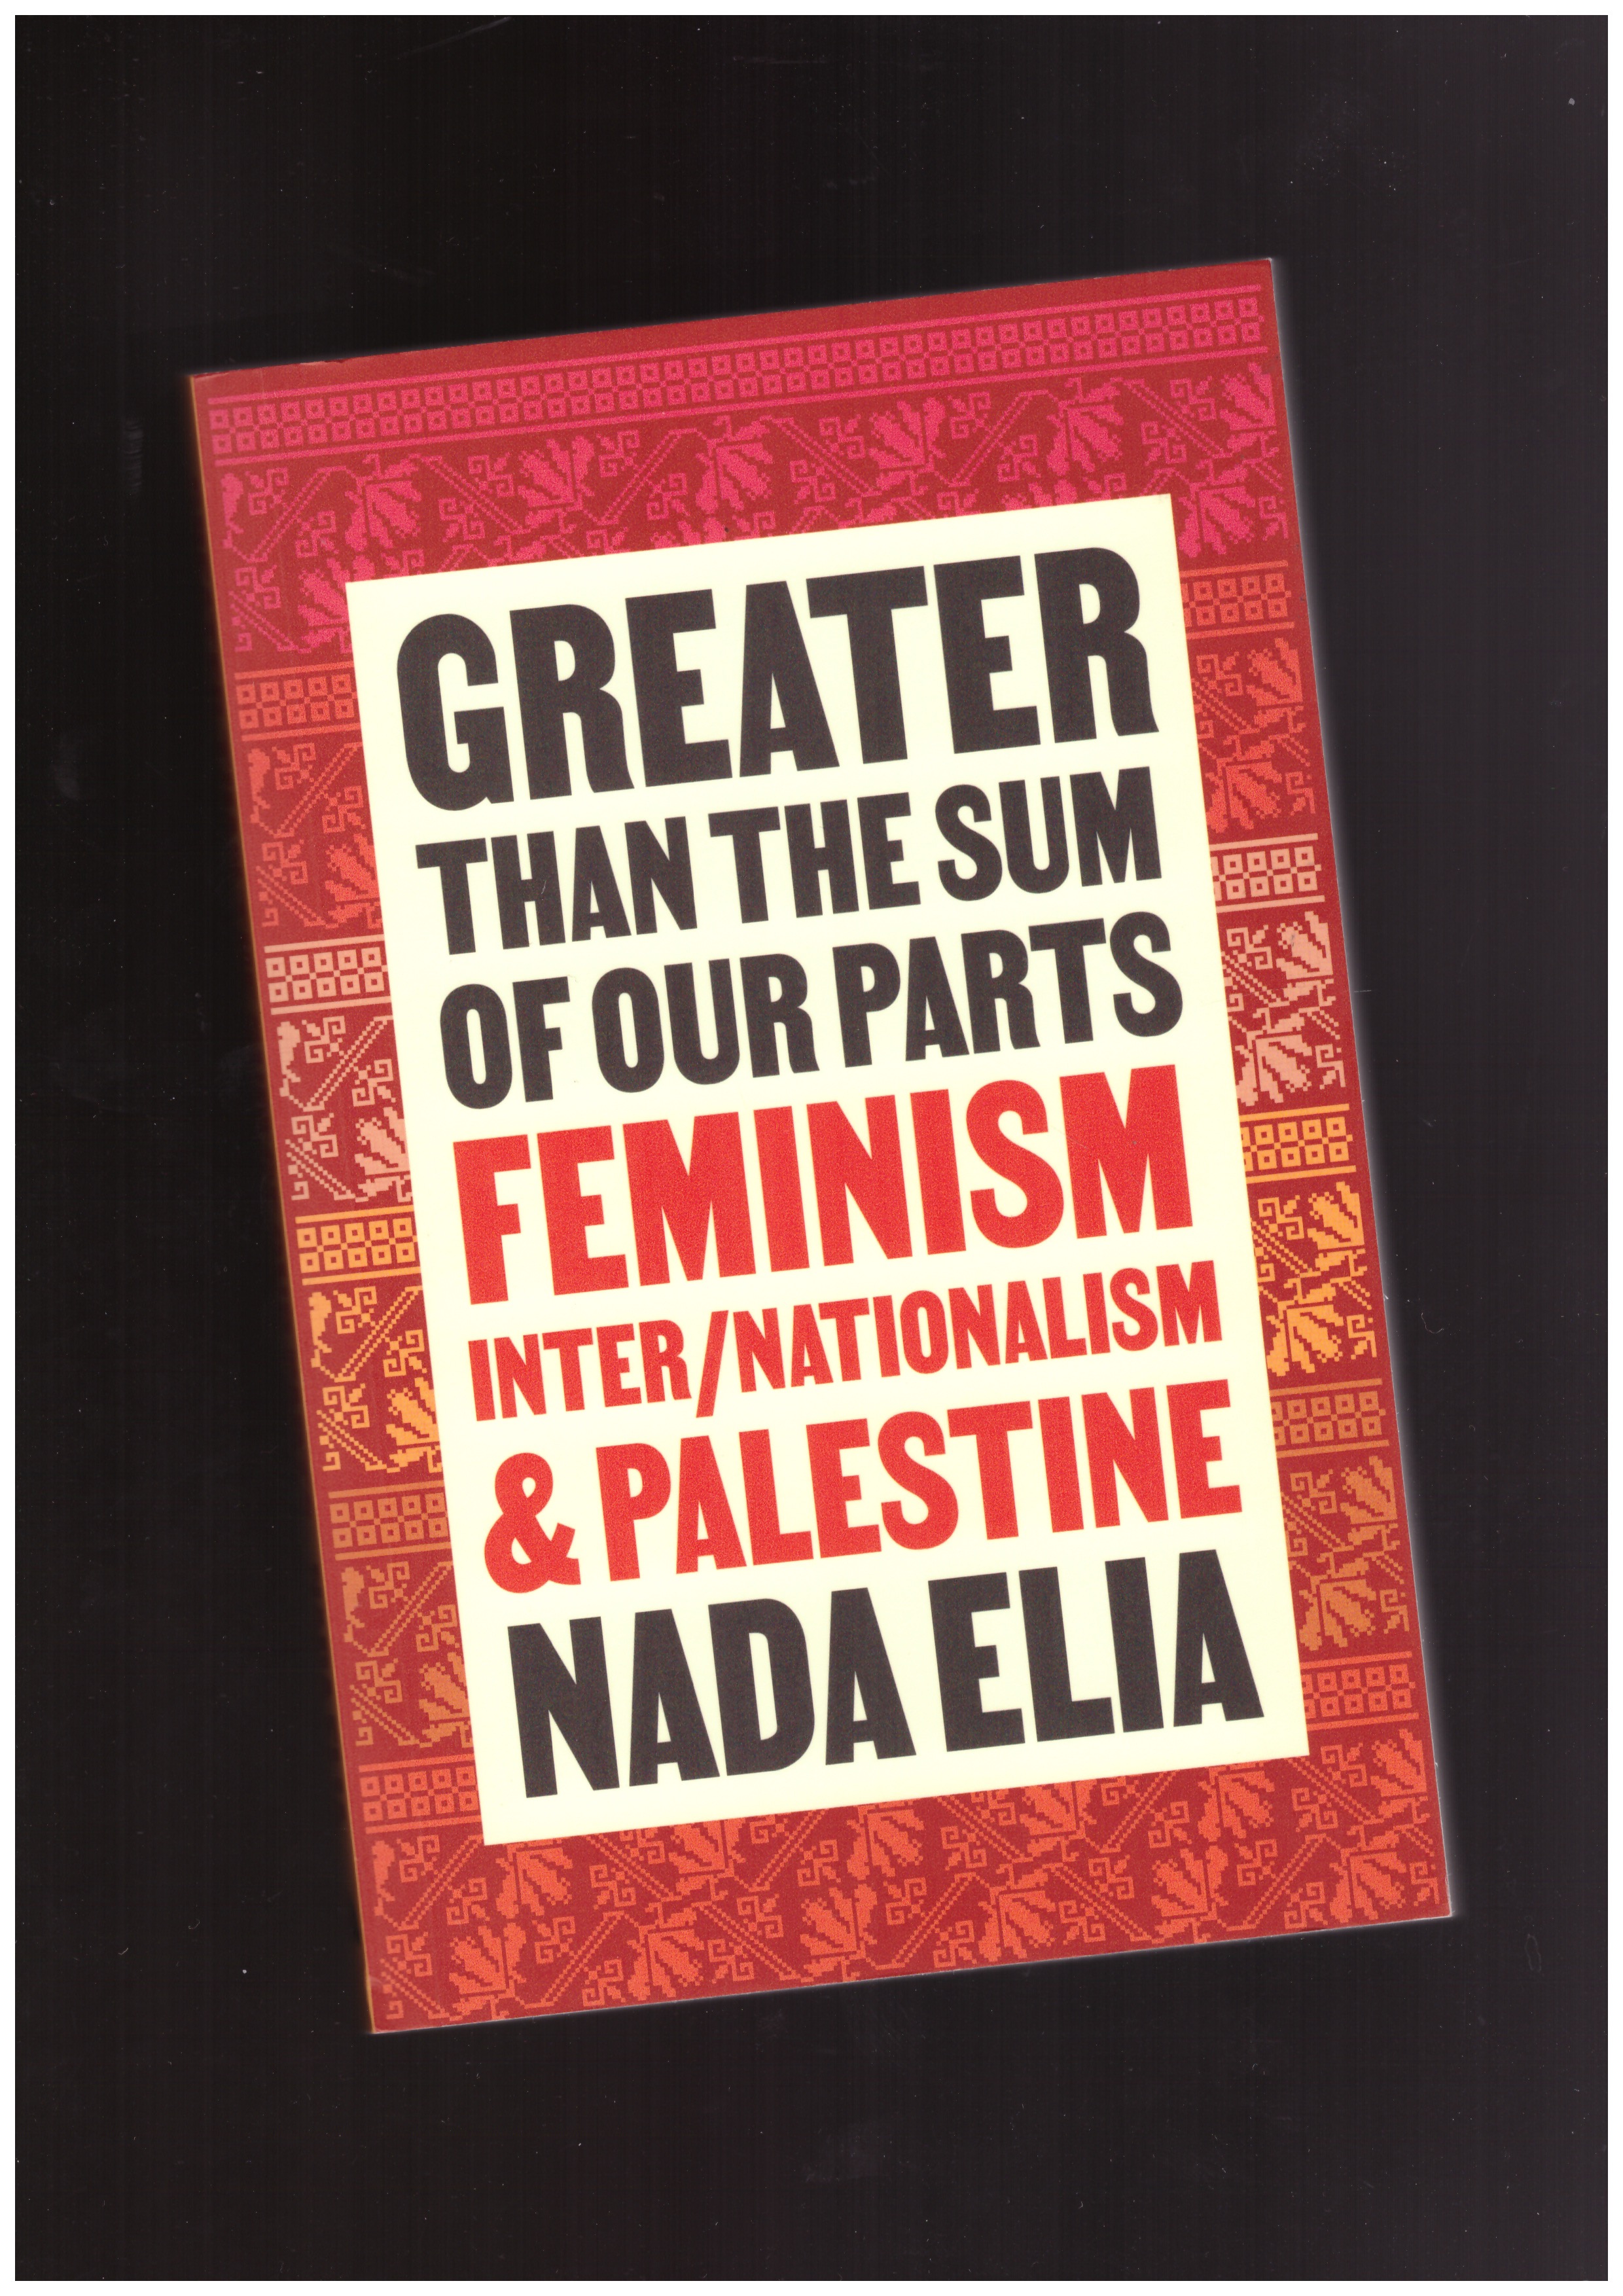 ELIA, Nada - Greater than the Sum of Our Parts. Feminism Inter/nationalism & Palestine